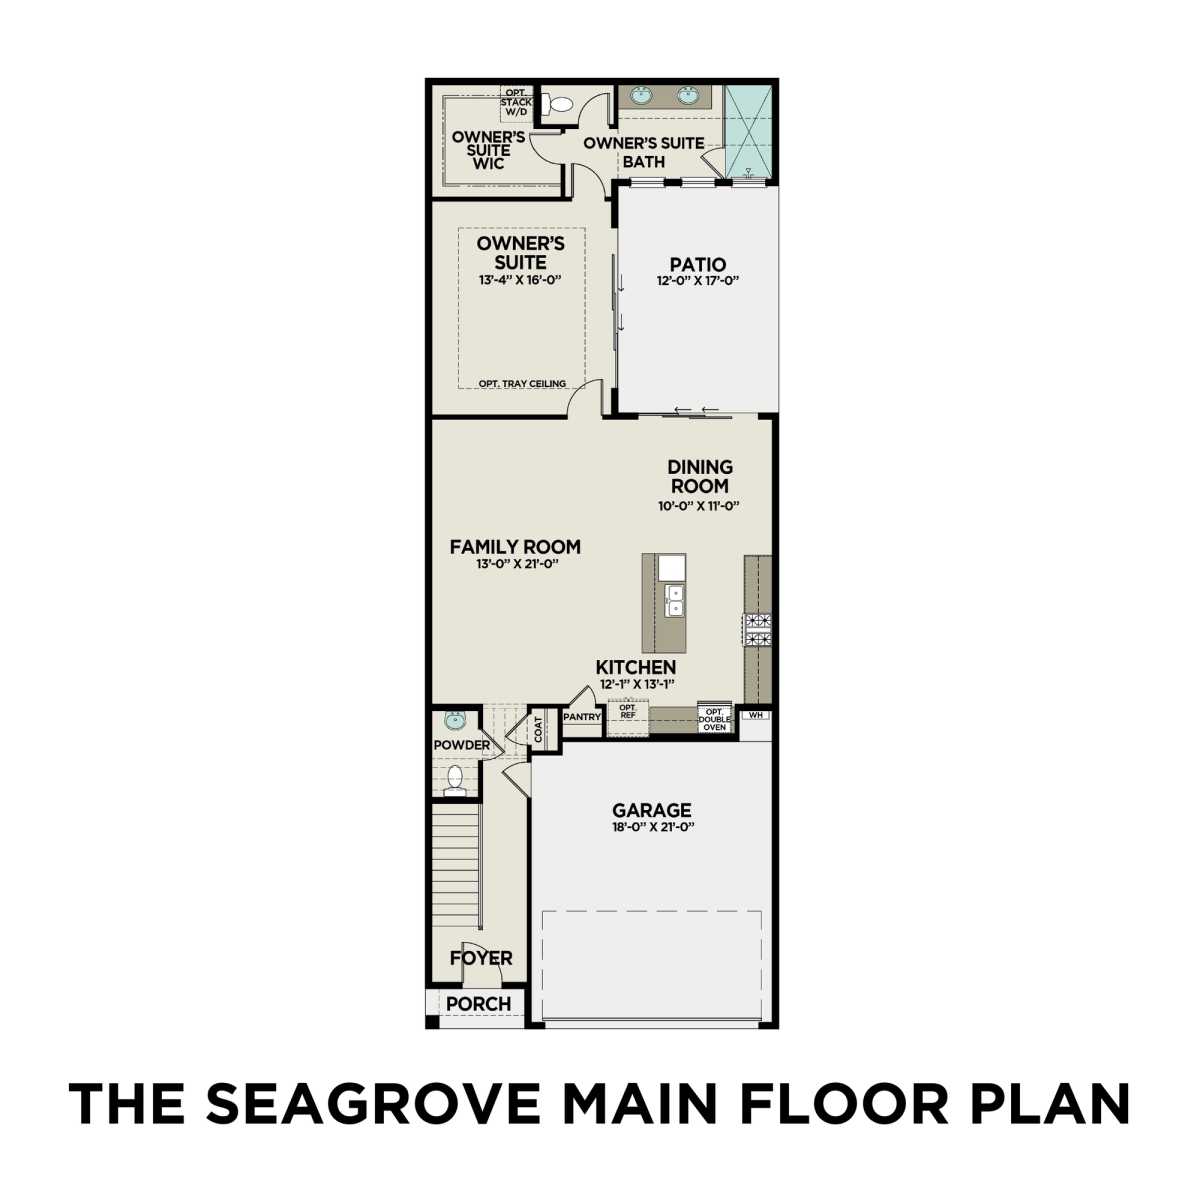 1 - The Seagrove A floor plan layout for 694 Stickley Oak Way in Davidson Homes' The Village at Towne Lake community.